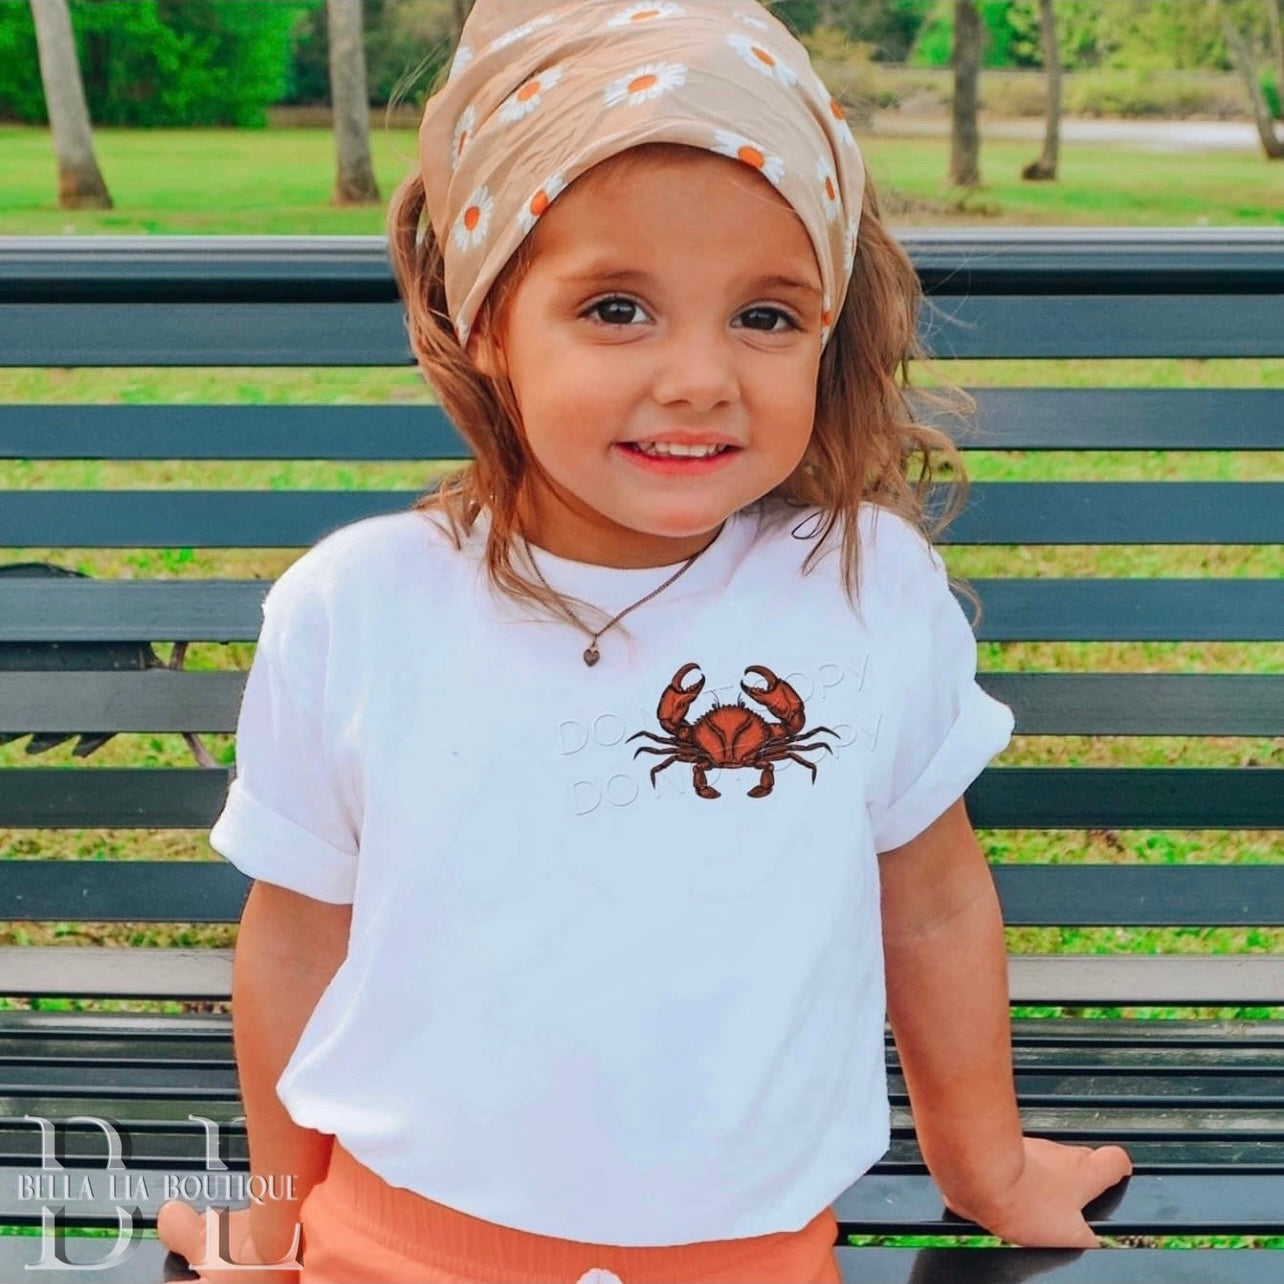 Crabby without Sunshine Toddler and Youth Tee - Bella Lia Boutique